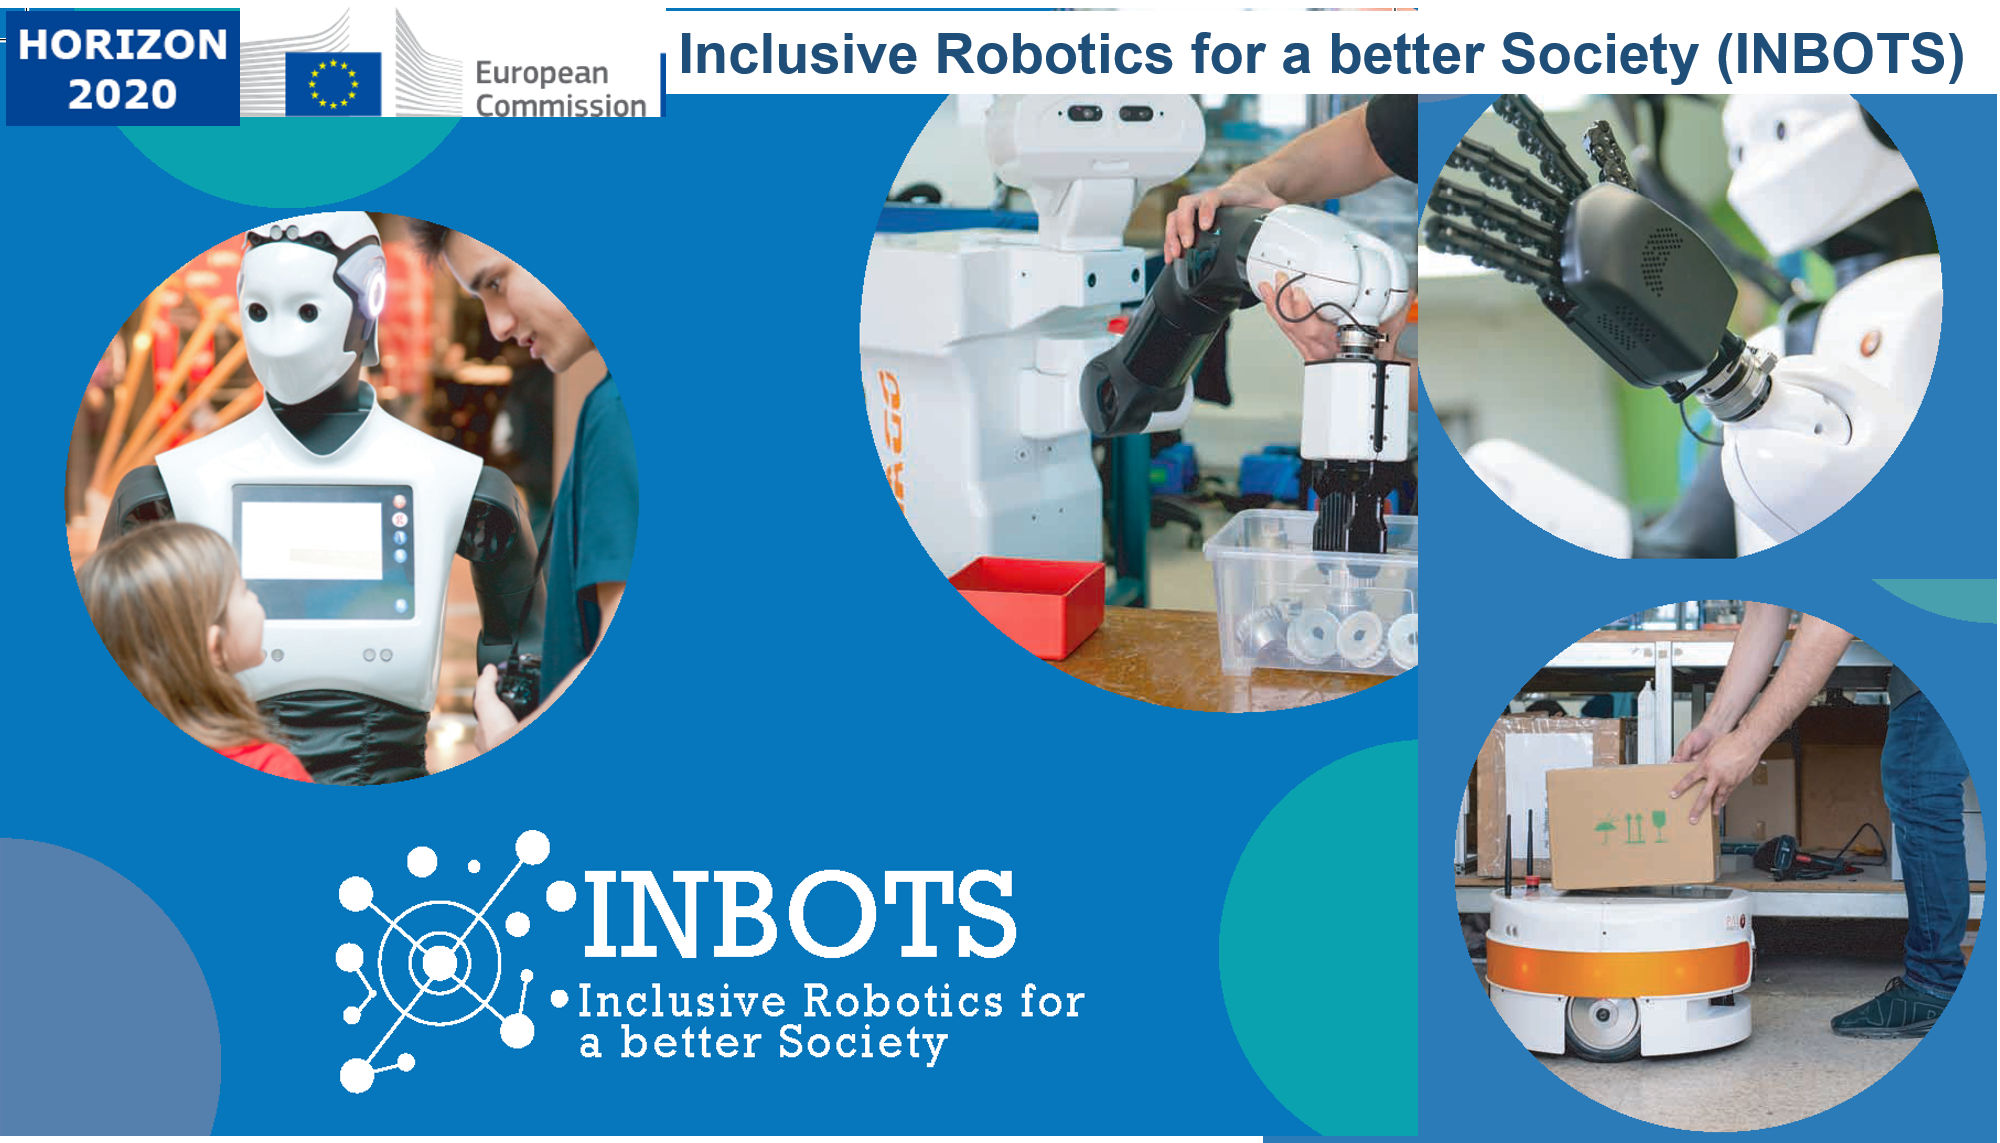 Inclusive Robotics for a better Society (INBOTS)